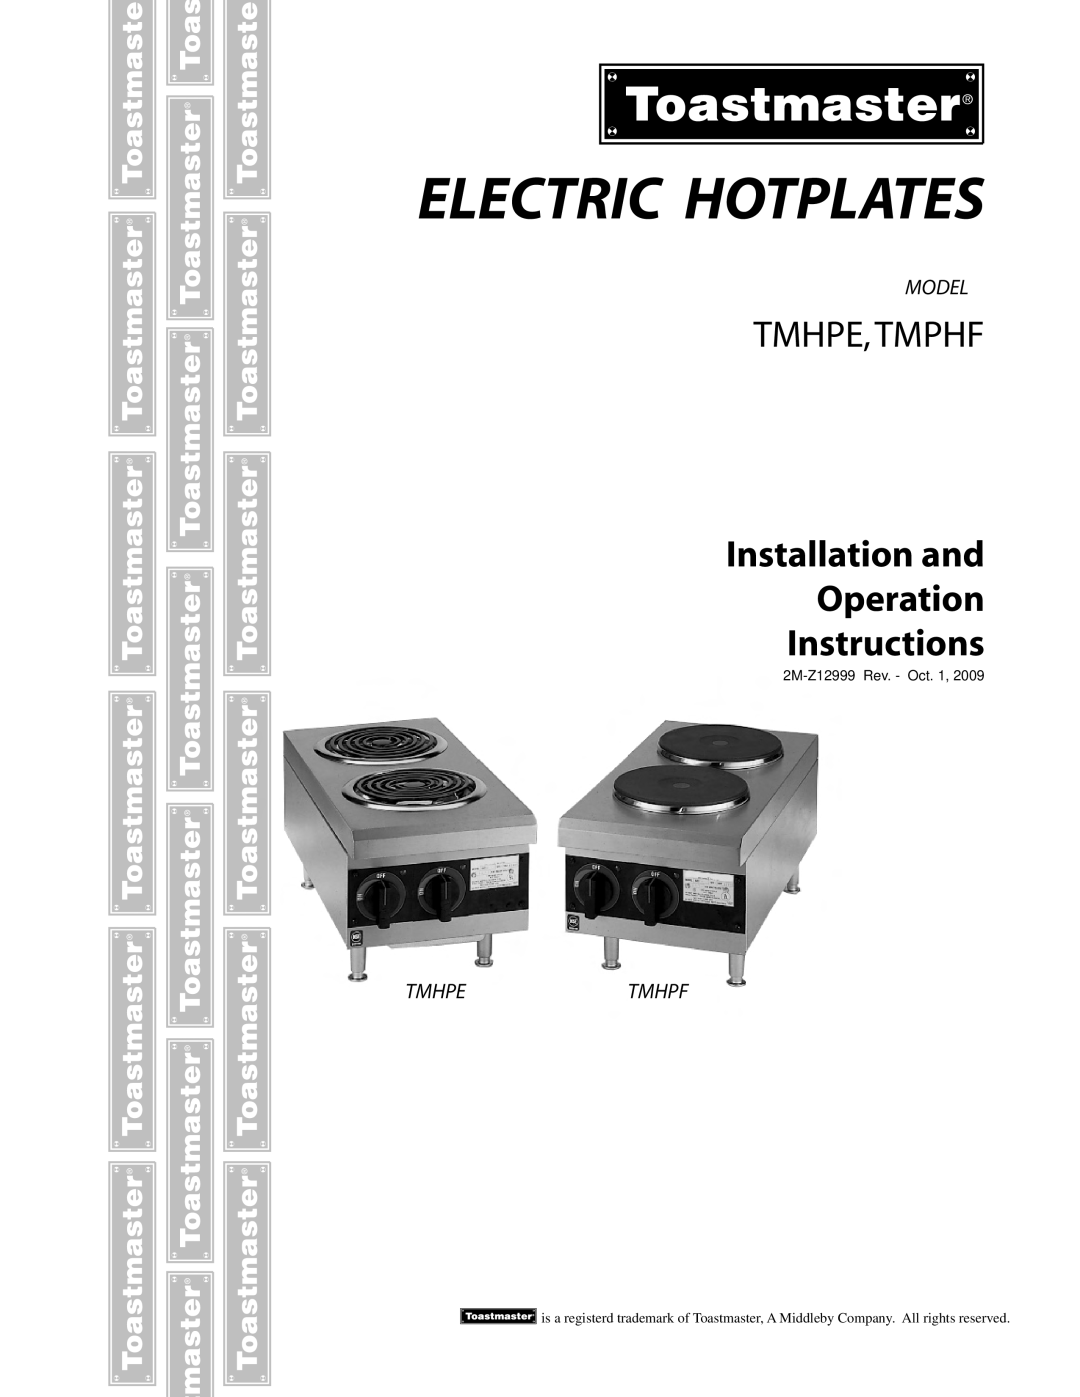 Toastmaster TMPHF manual Electric Hotplates, Tmhpe, Tmphf, Installation and Operation Instructions, Model, Tmhpetmhpf 